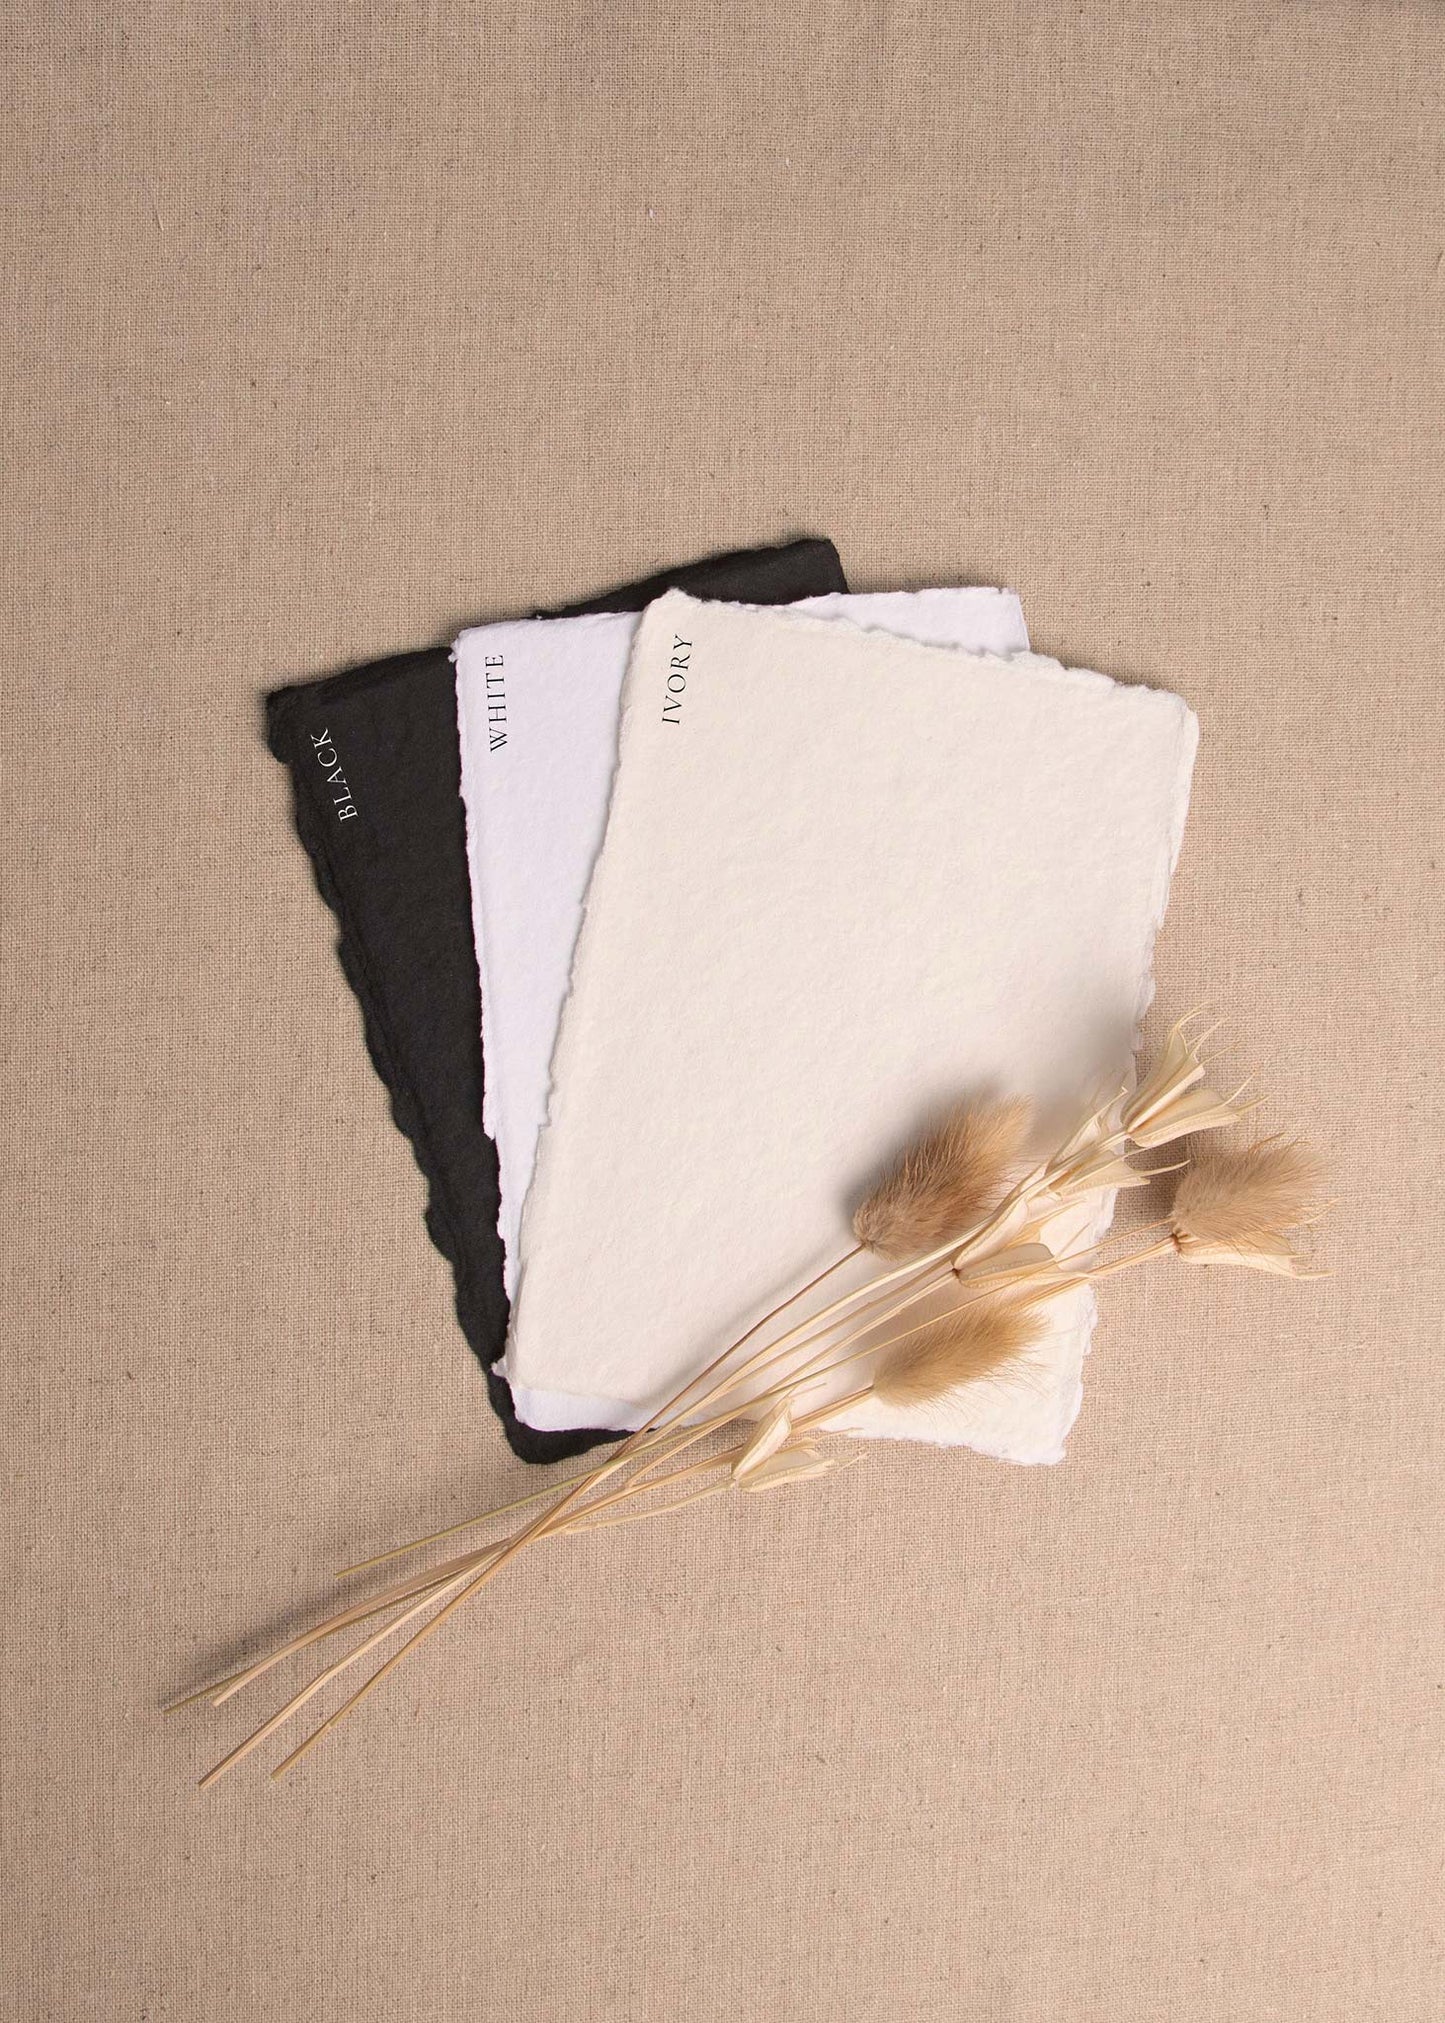 Fanned pile of Black, White, Ivory handmade paper with deckle edge surrounded by dried flowers